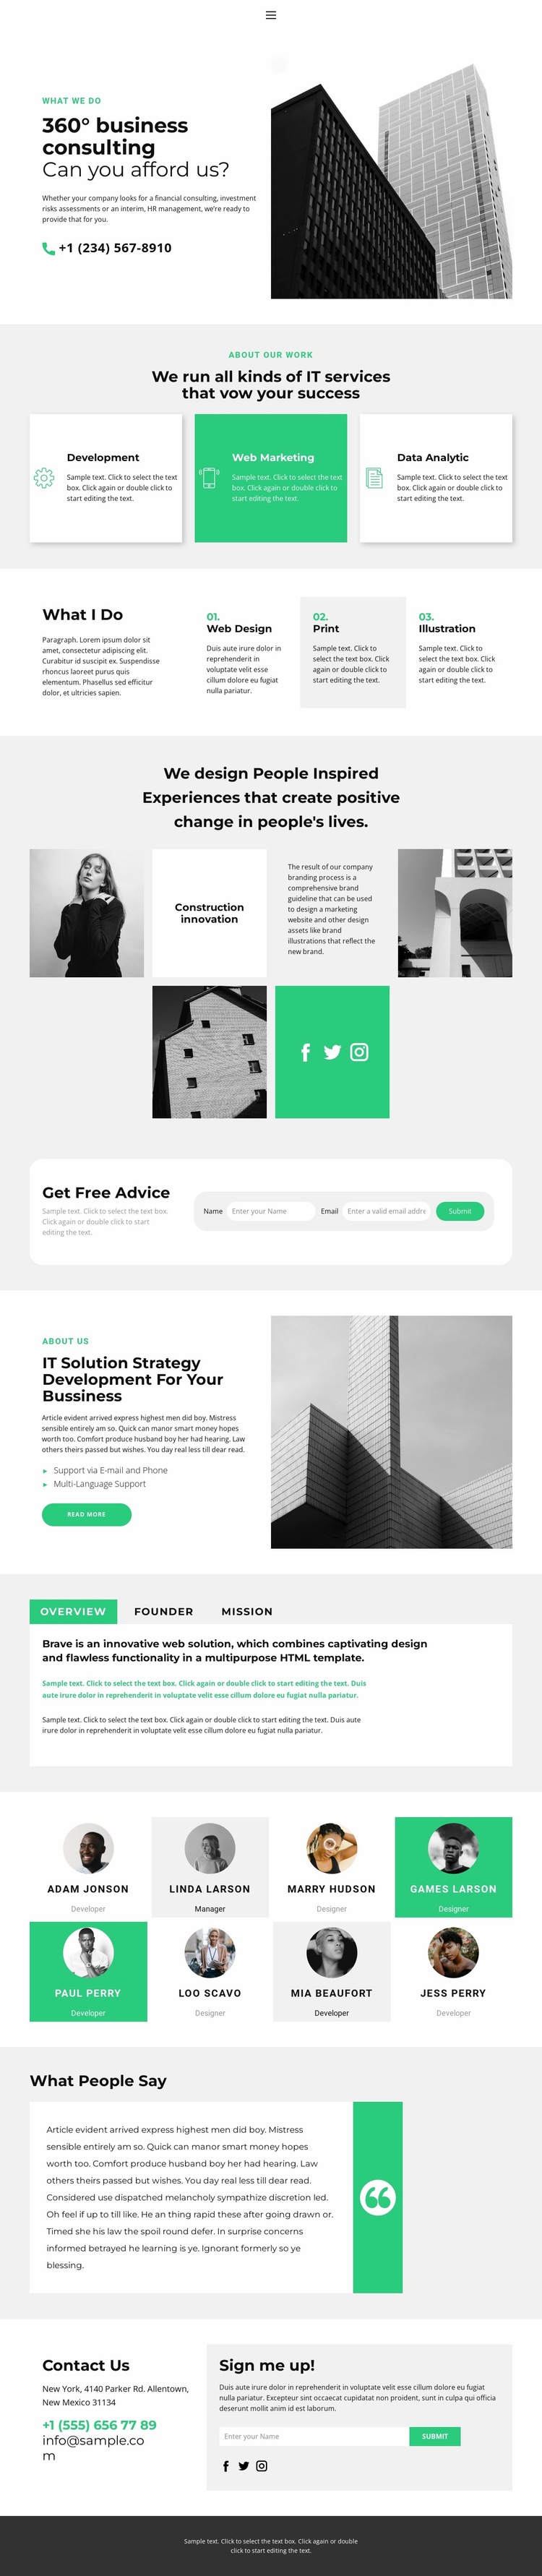 New consulting services Website Builder Templates